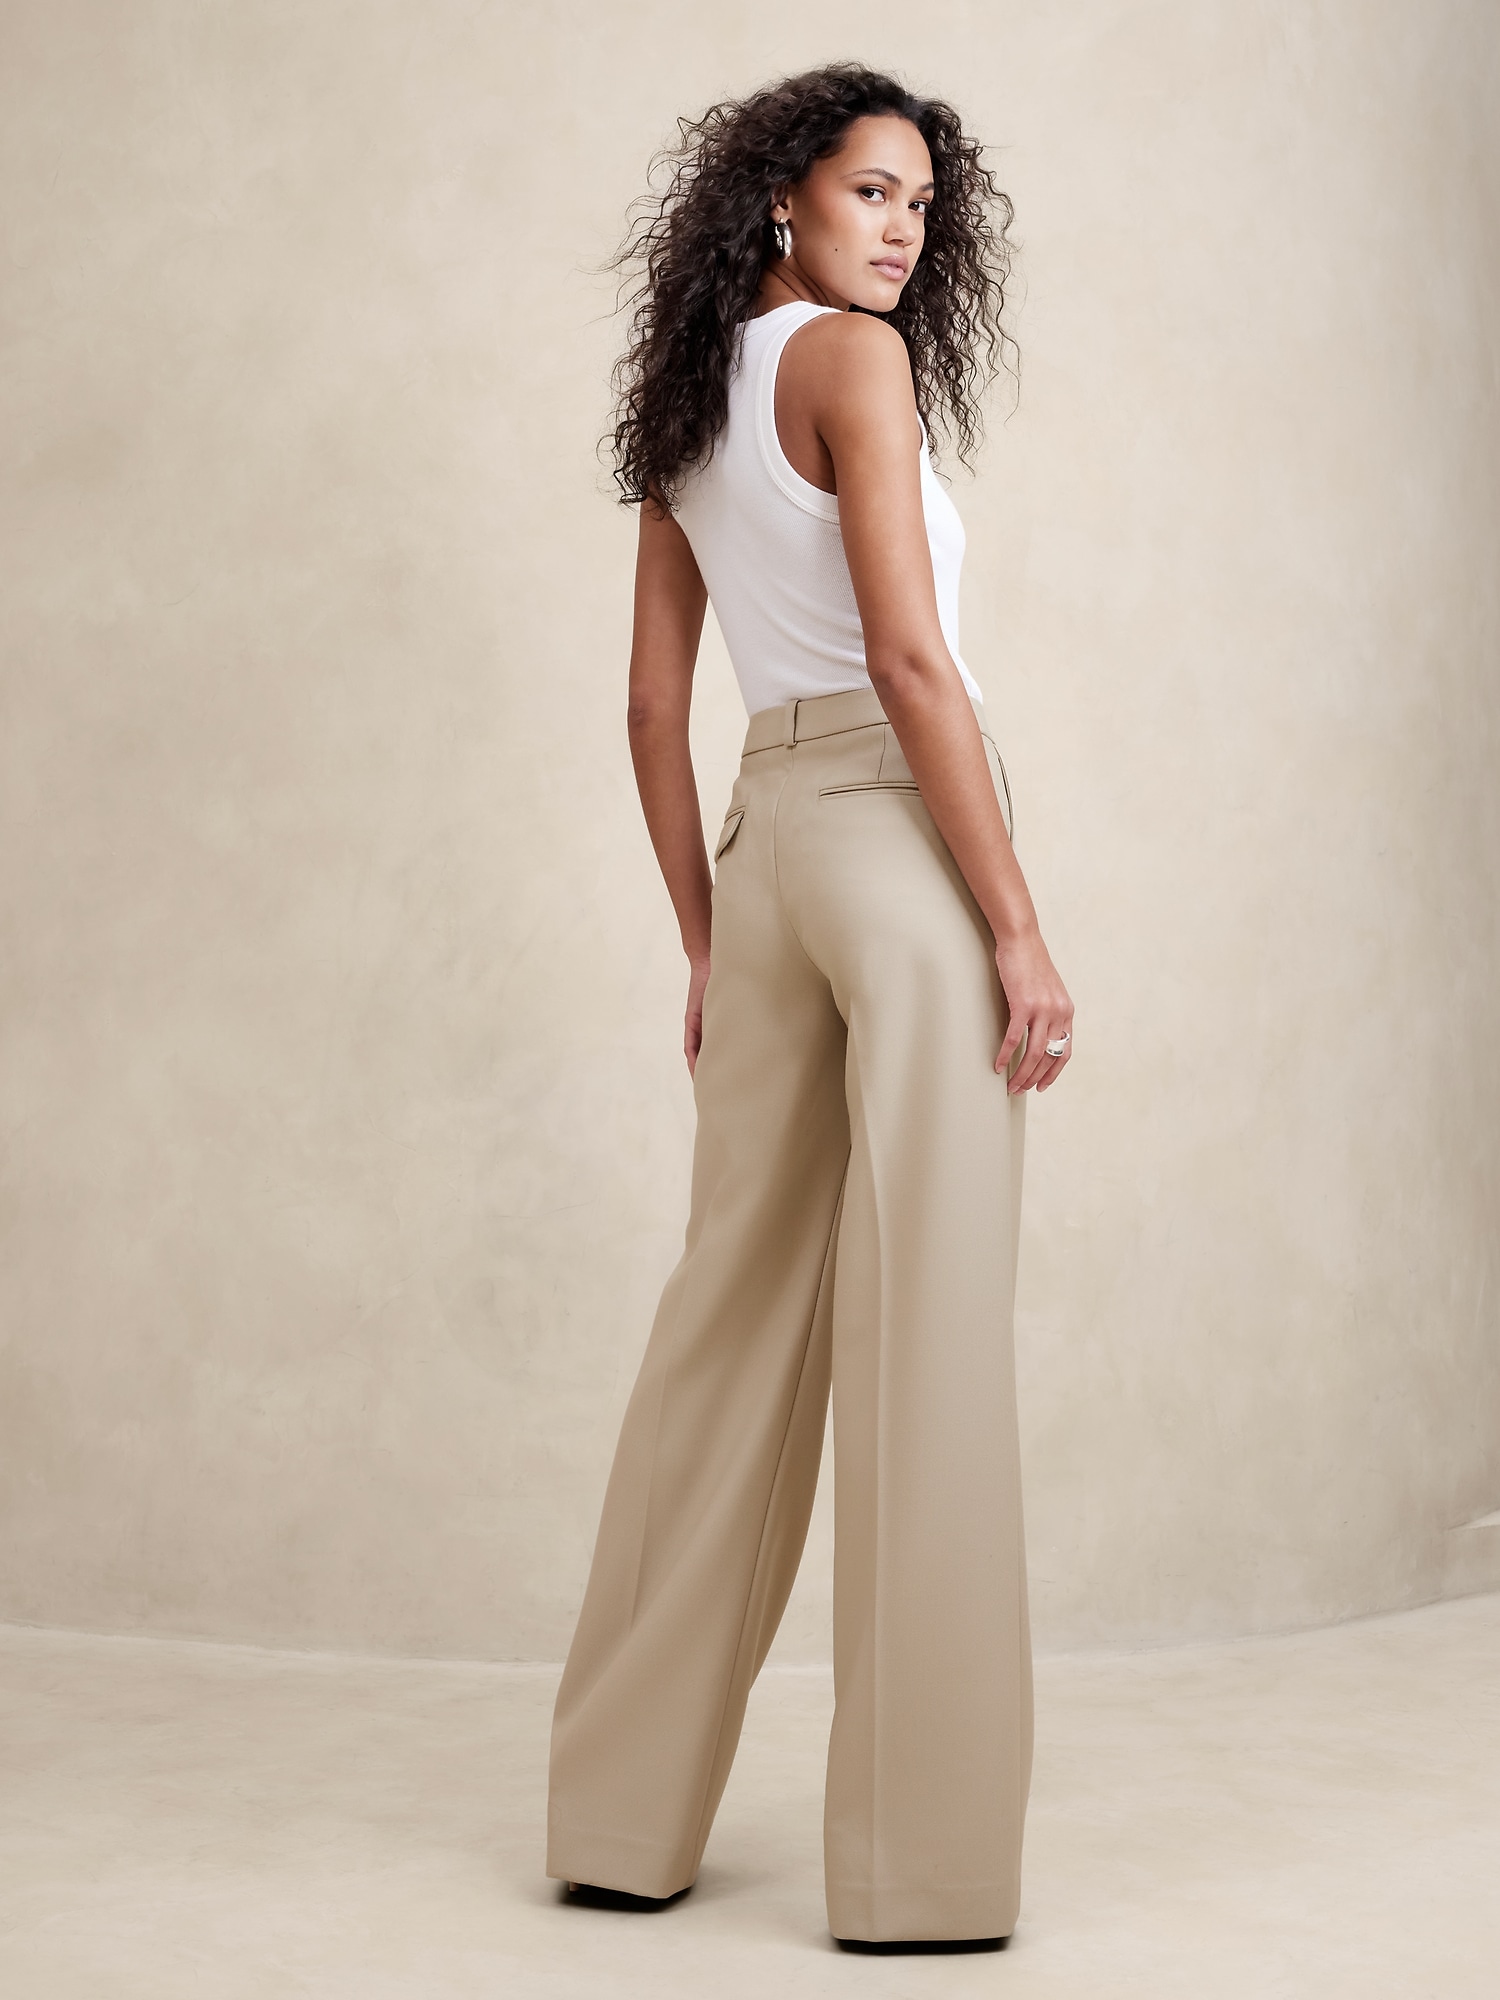 Dress Like An Italian Woman and Look Elegant Daily with our Popular Italian  Style Guide | La Belle Society | Formal trousers women, Women's white  trousers, Clothes for women